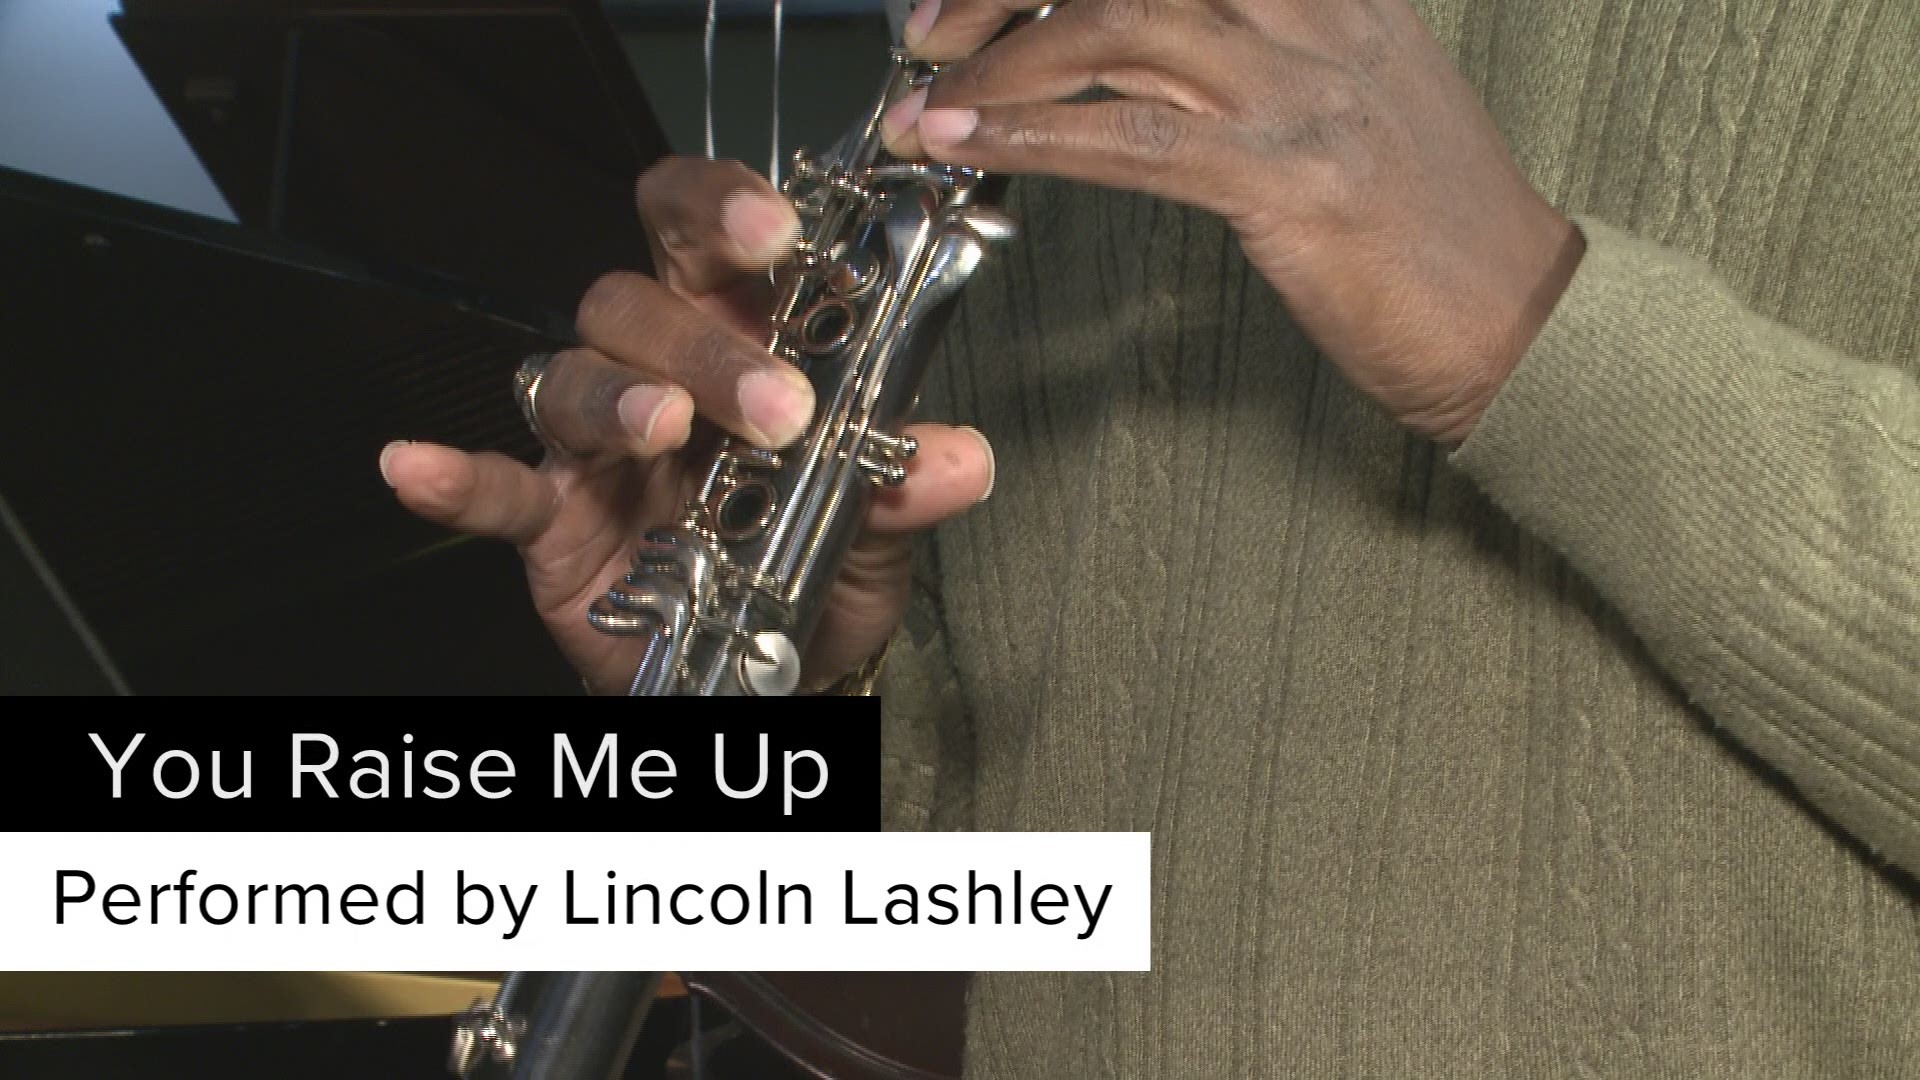 Lincoln Lashley performs You Raise Me Up